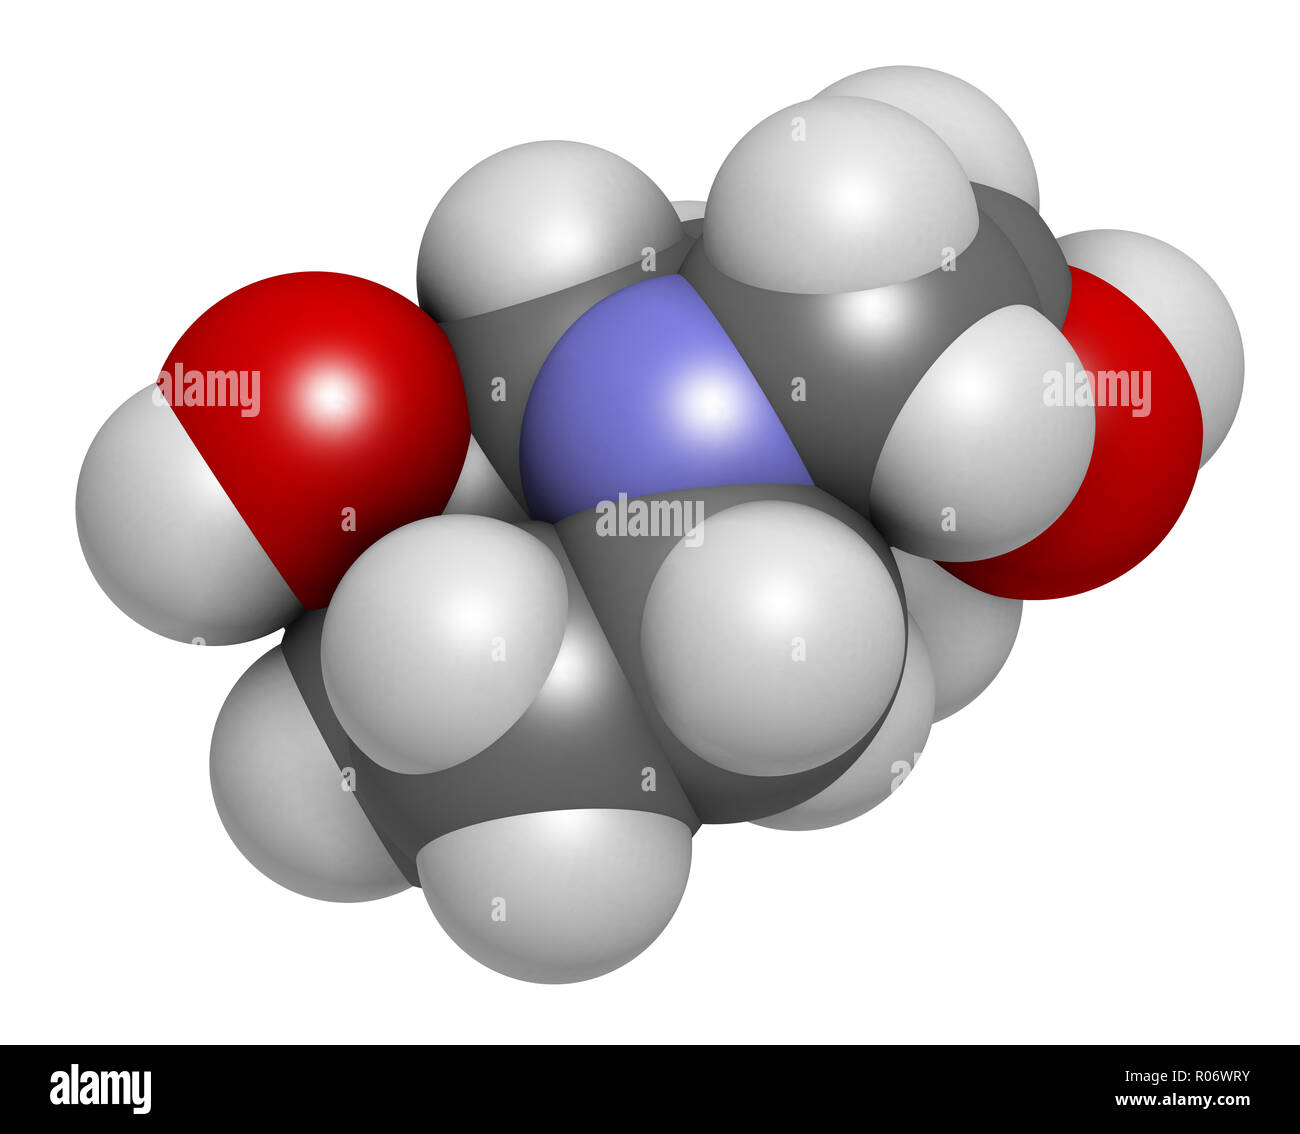 Swainsonine locoweed toxin molecule. Present in Astragalus, Oxytropis and Swainsona plant species. 3D rendering. Atoms are represented as spheres with Stock Photo